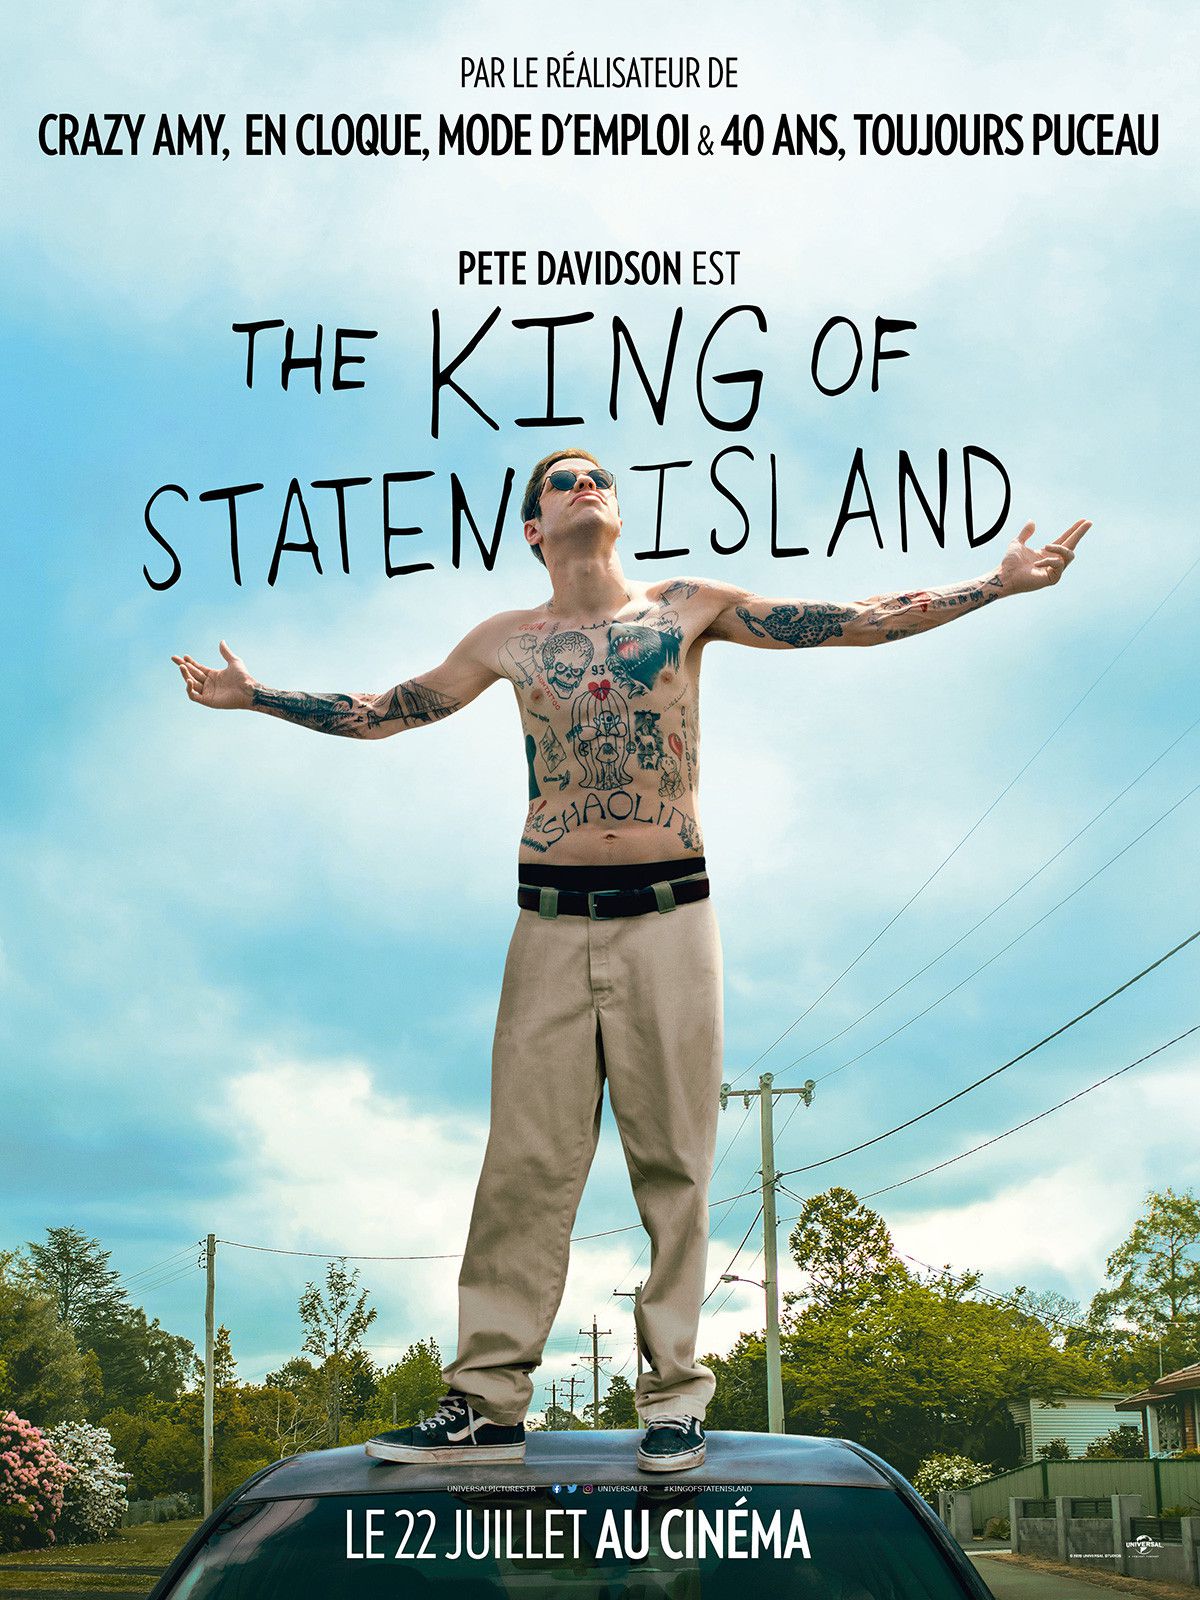 The King of Staten Island - Film (2020) streaming VF gratuit complet